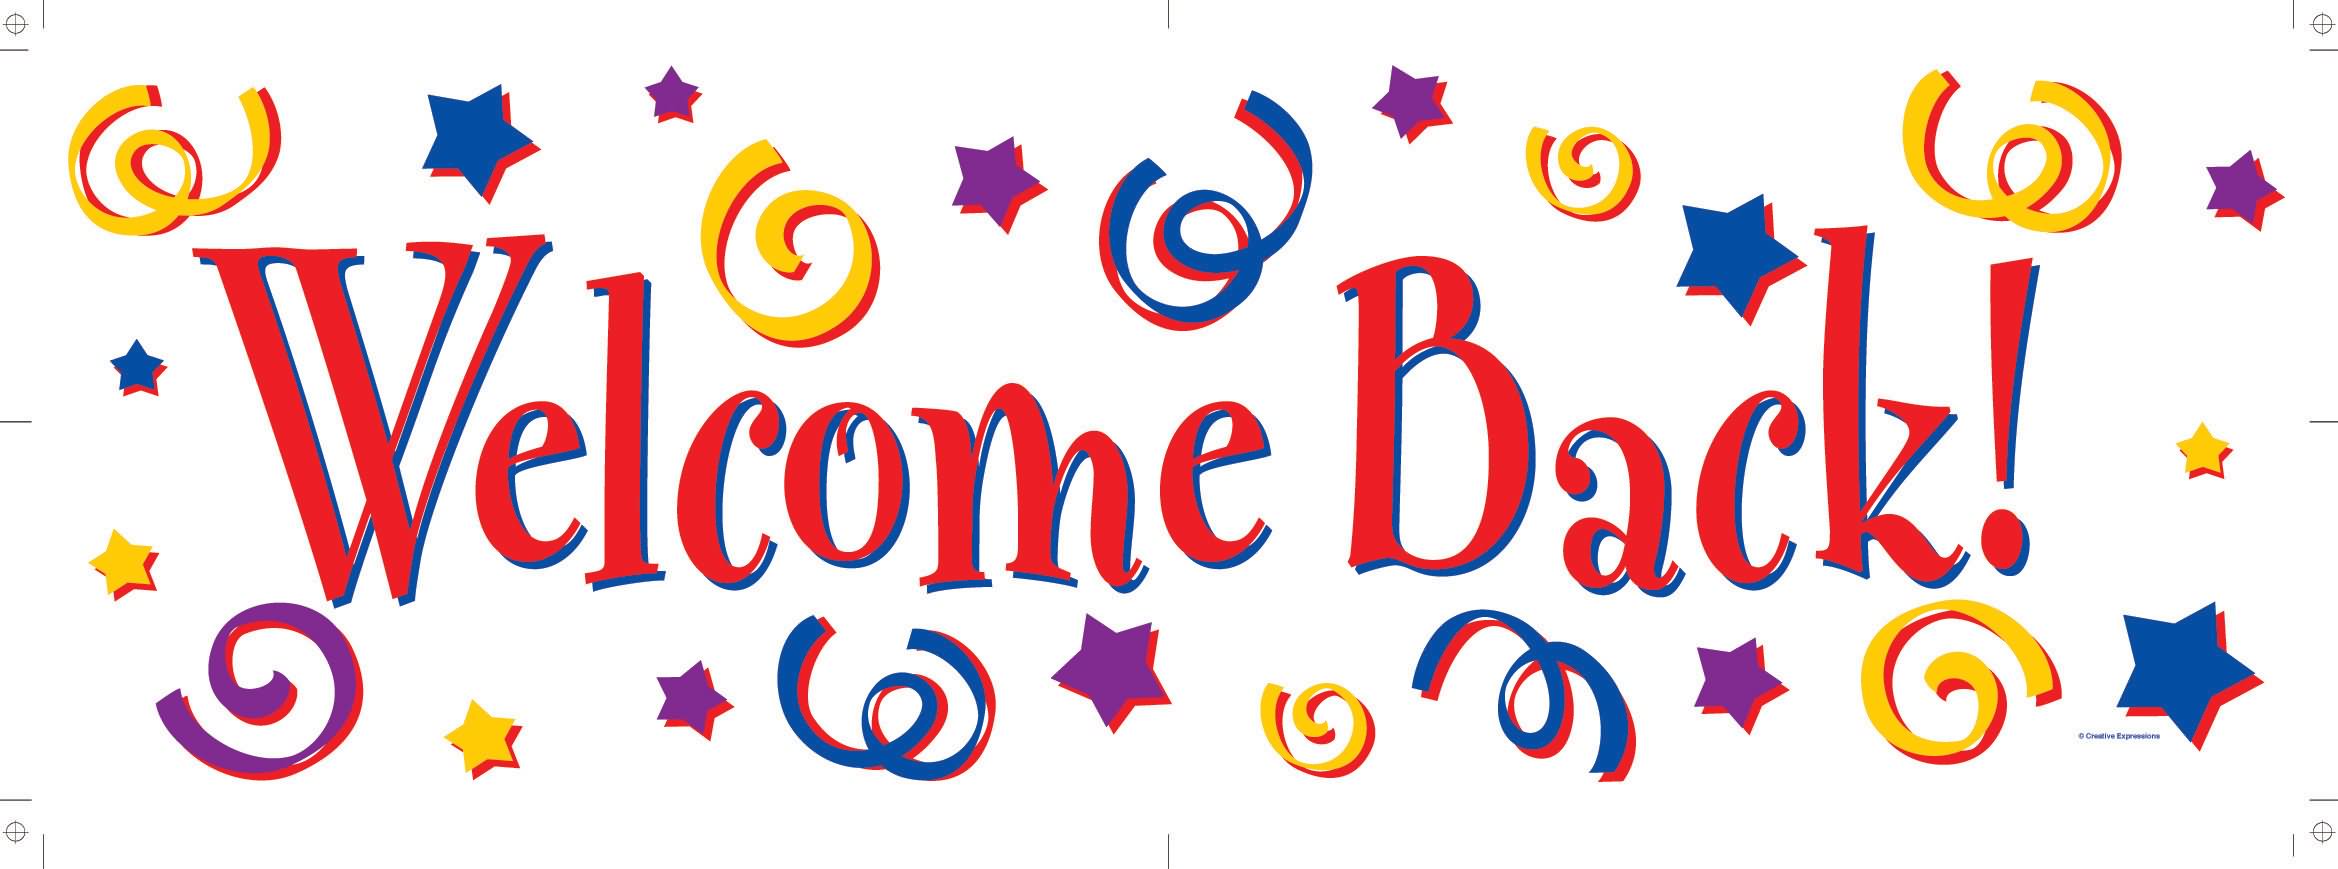 Welcome animated clipart clip art